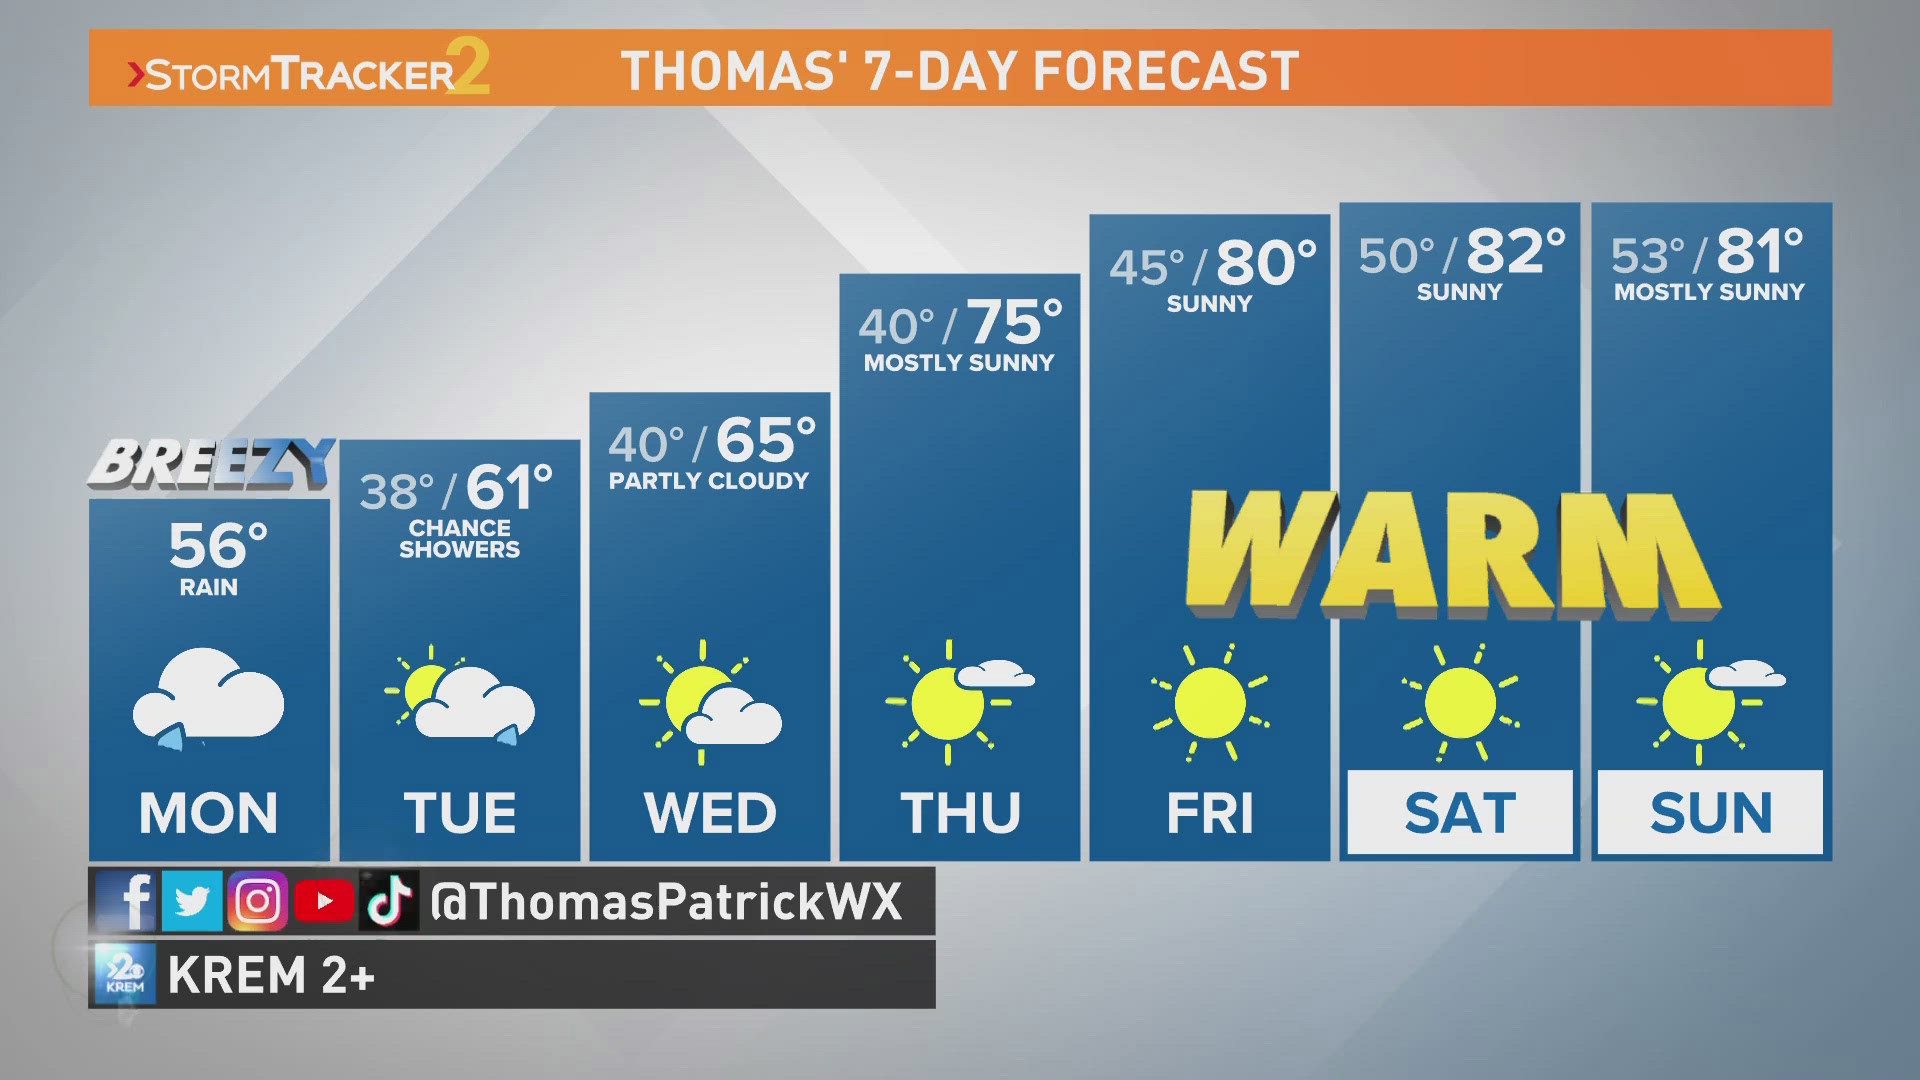 A warming trend will bring sunshine and high 70's back by the end of the week.